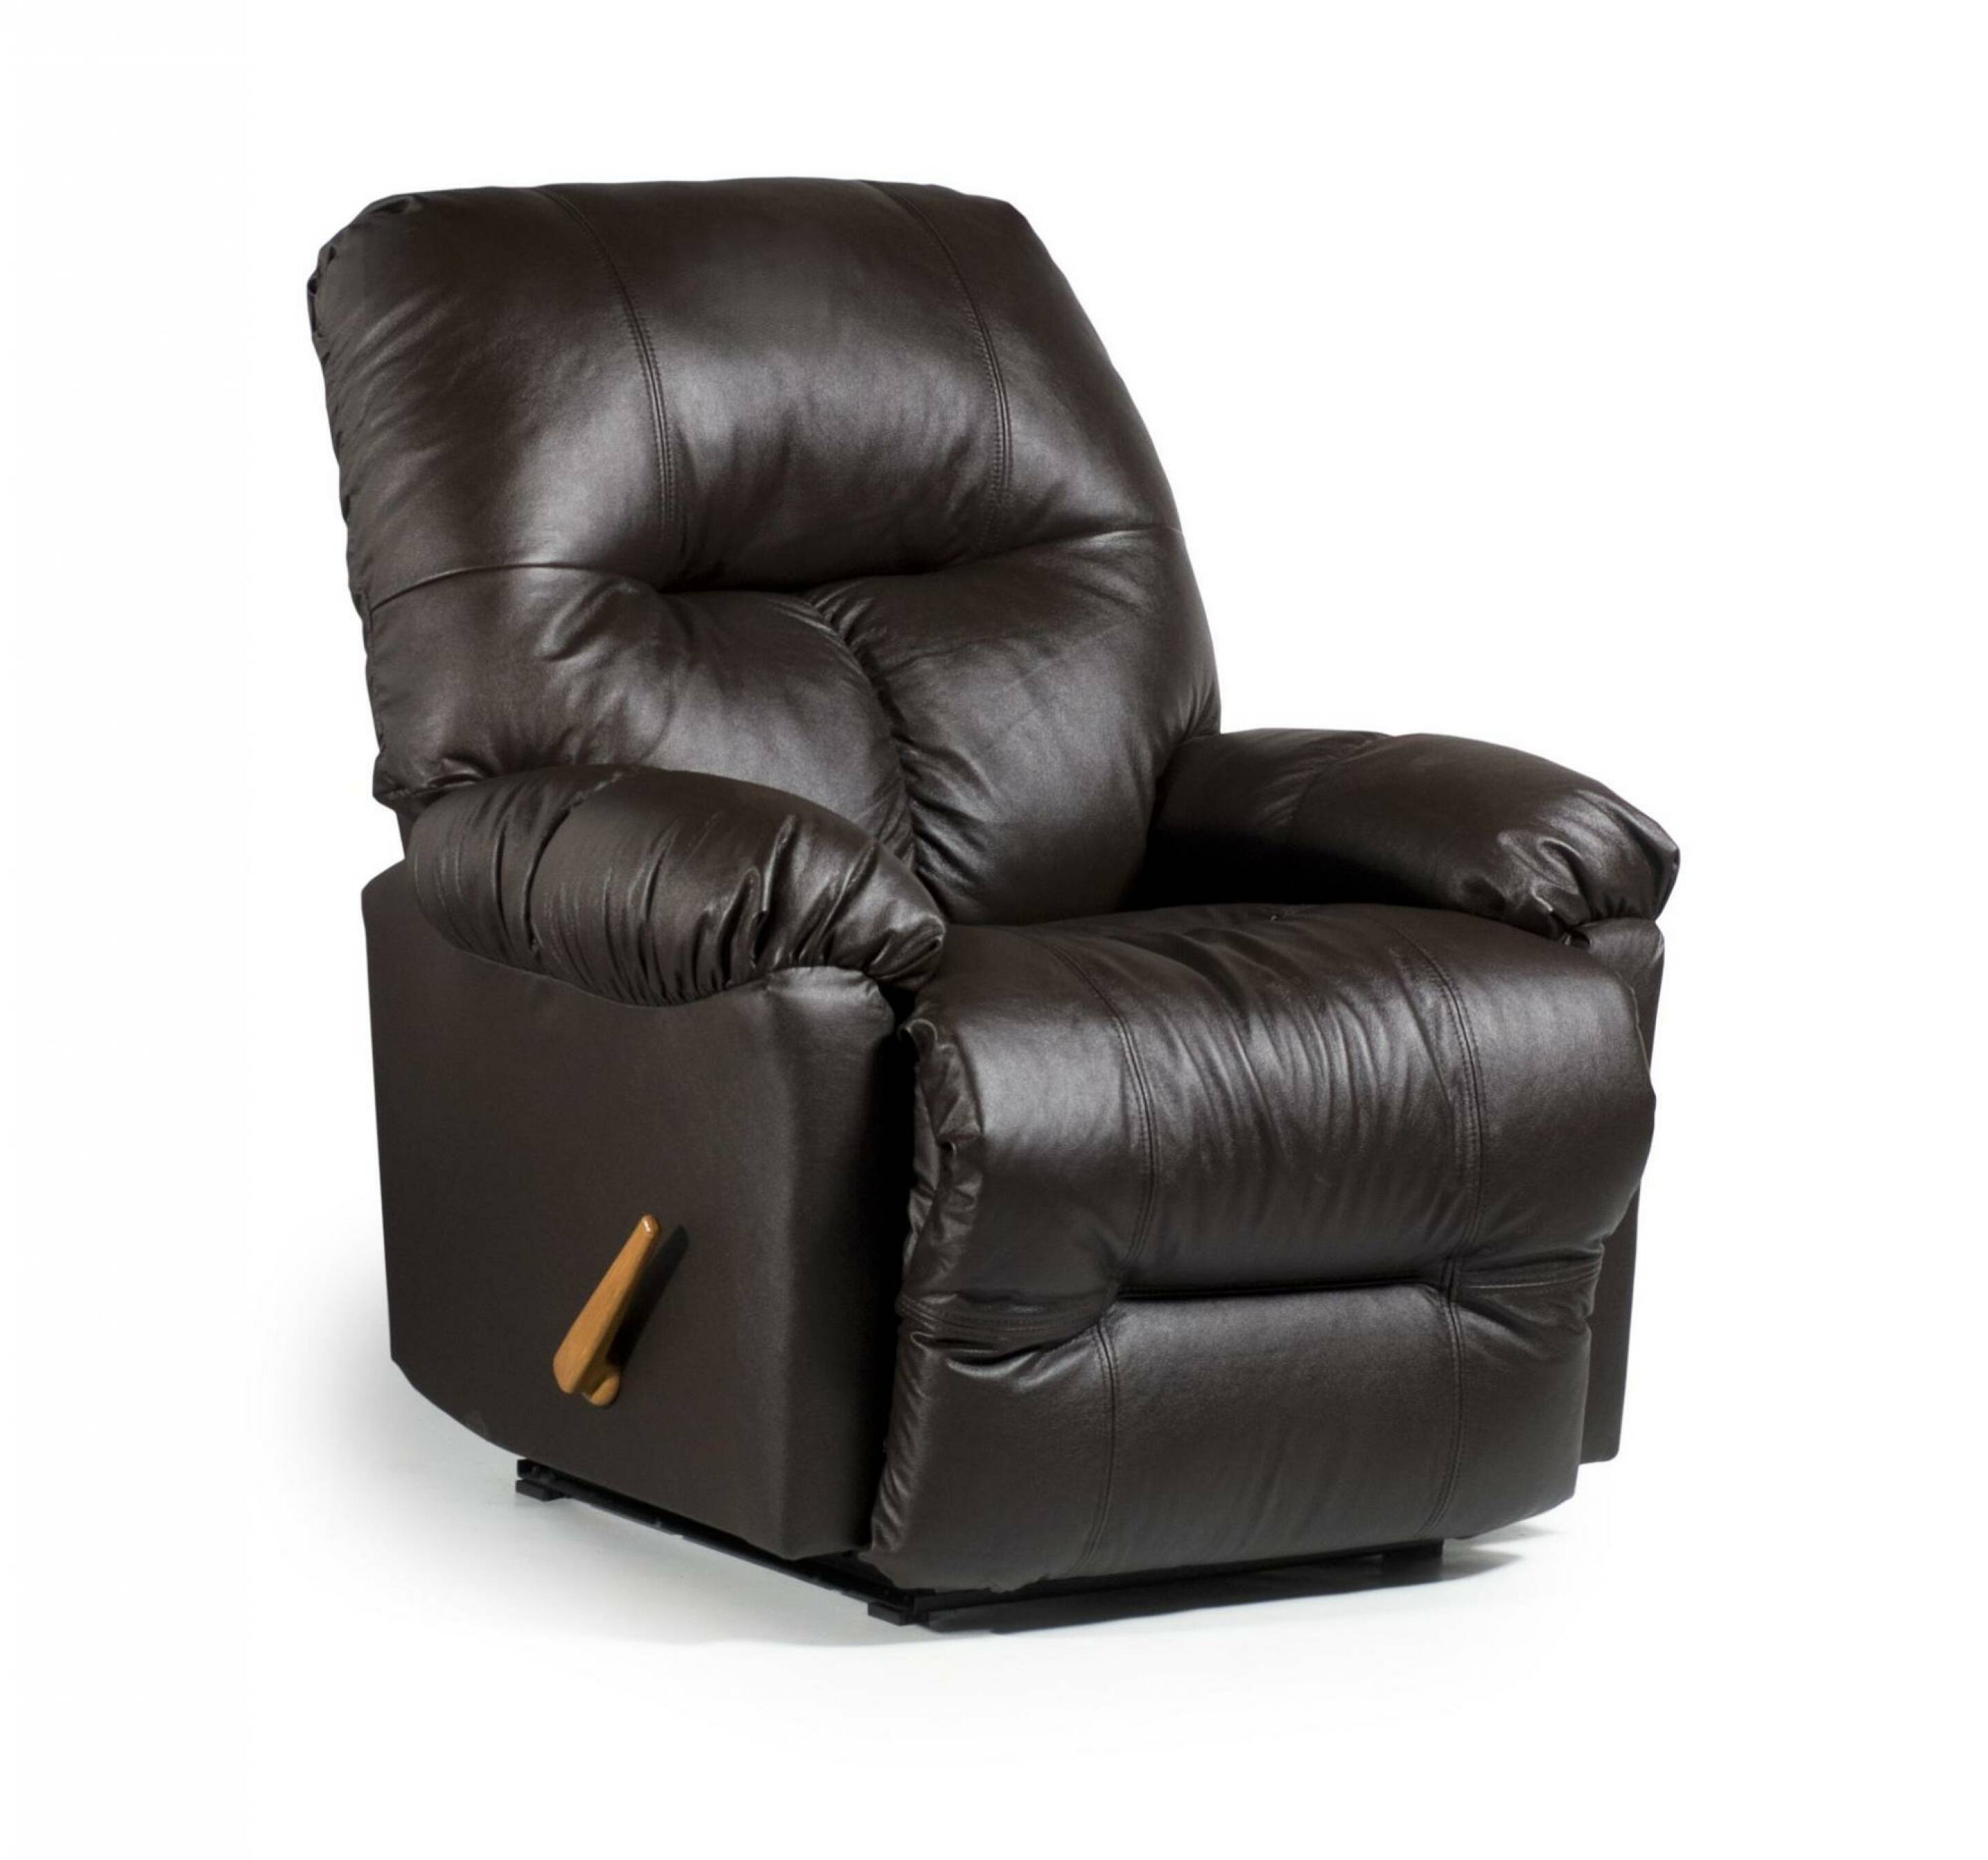 Win A Genuine Leather Recliner From Economy Furniture